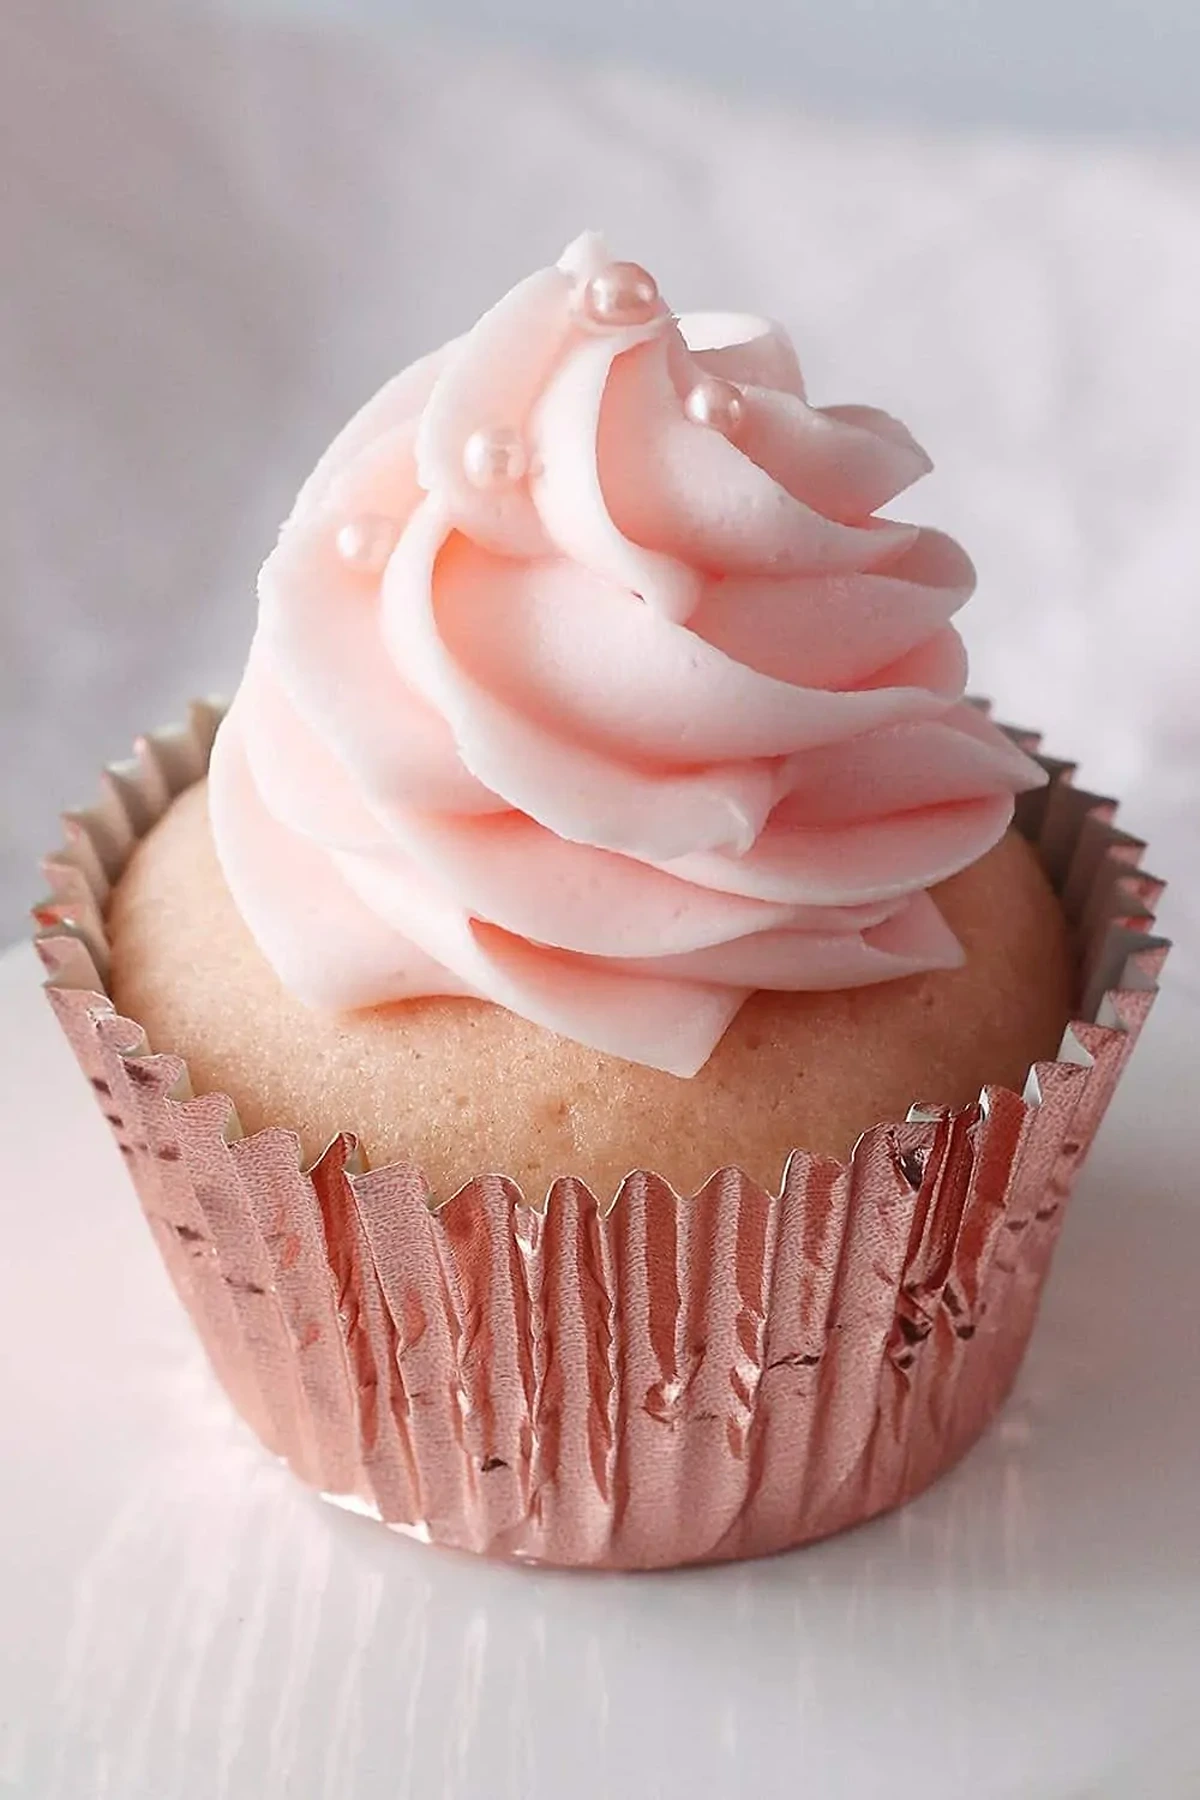 9. Champagne Cupcakes